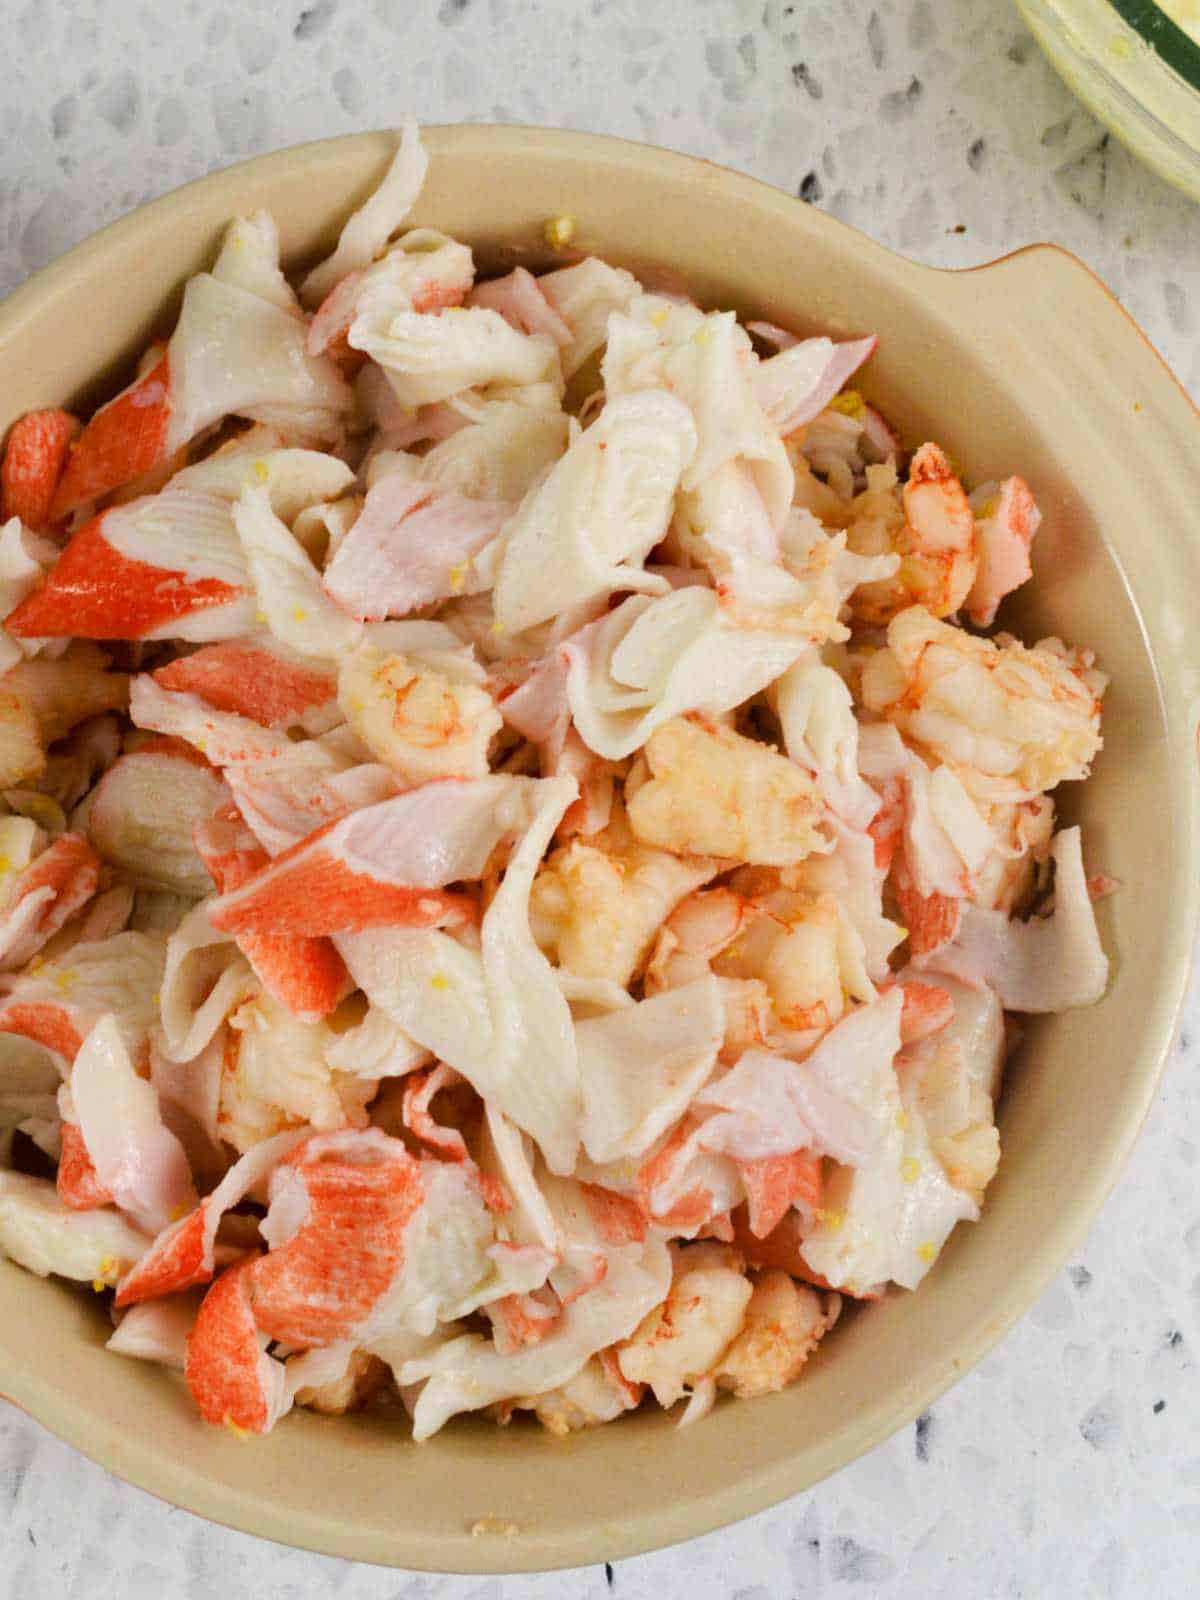 cooked crab and shrimp meat in a bowl.